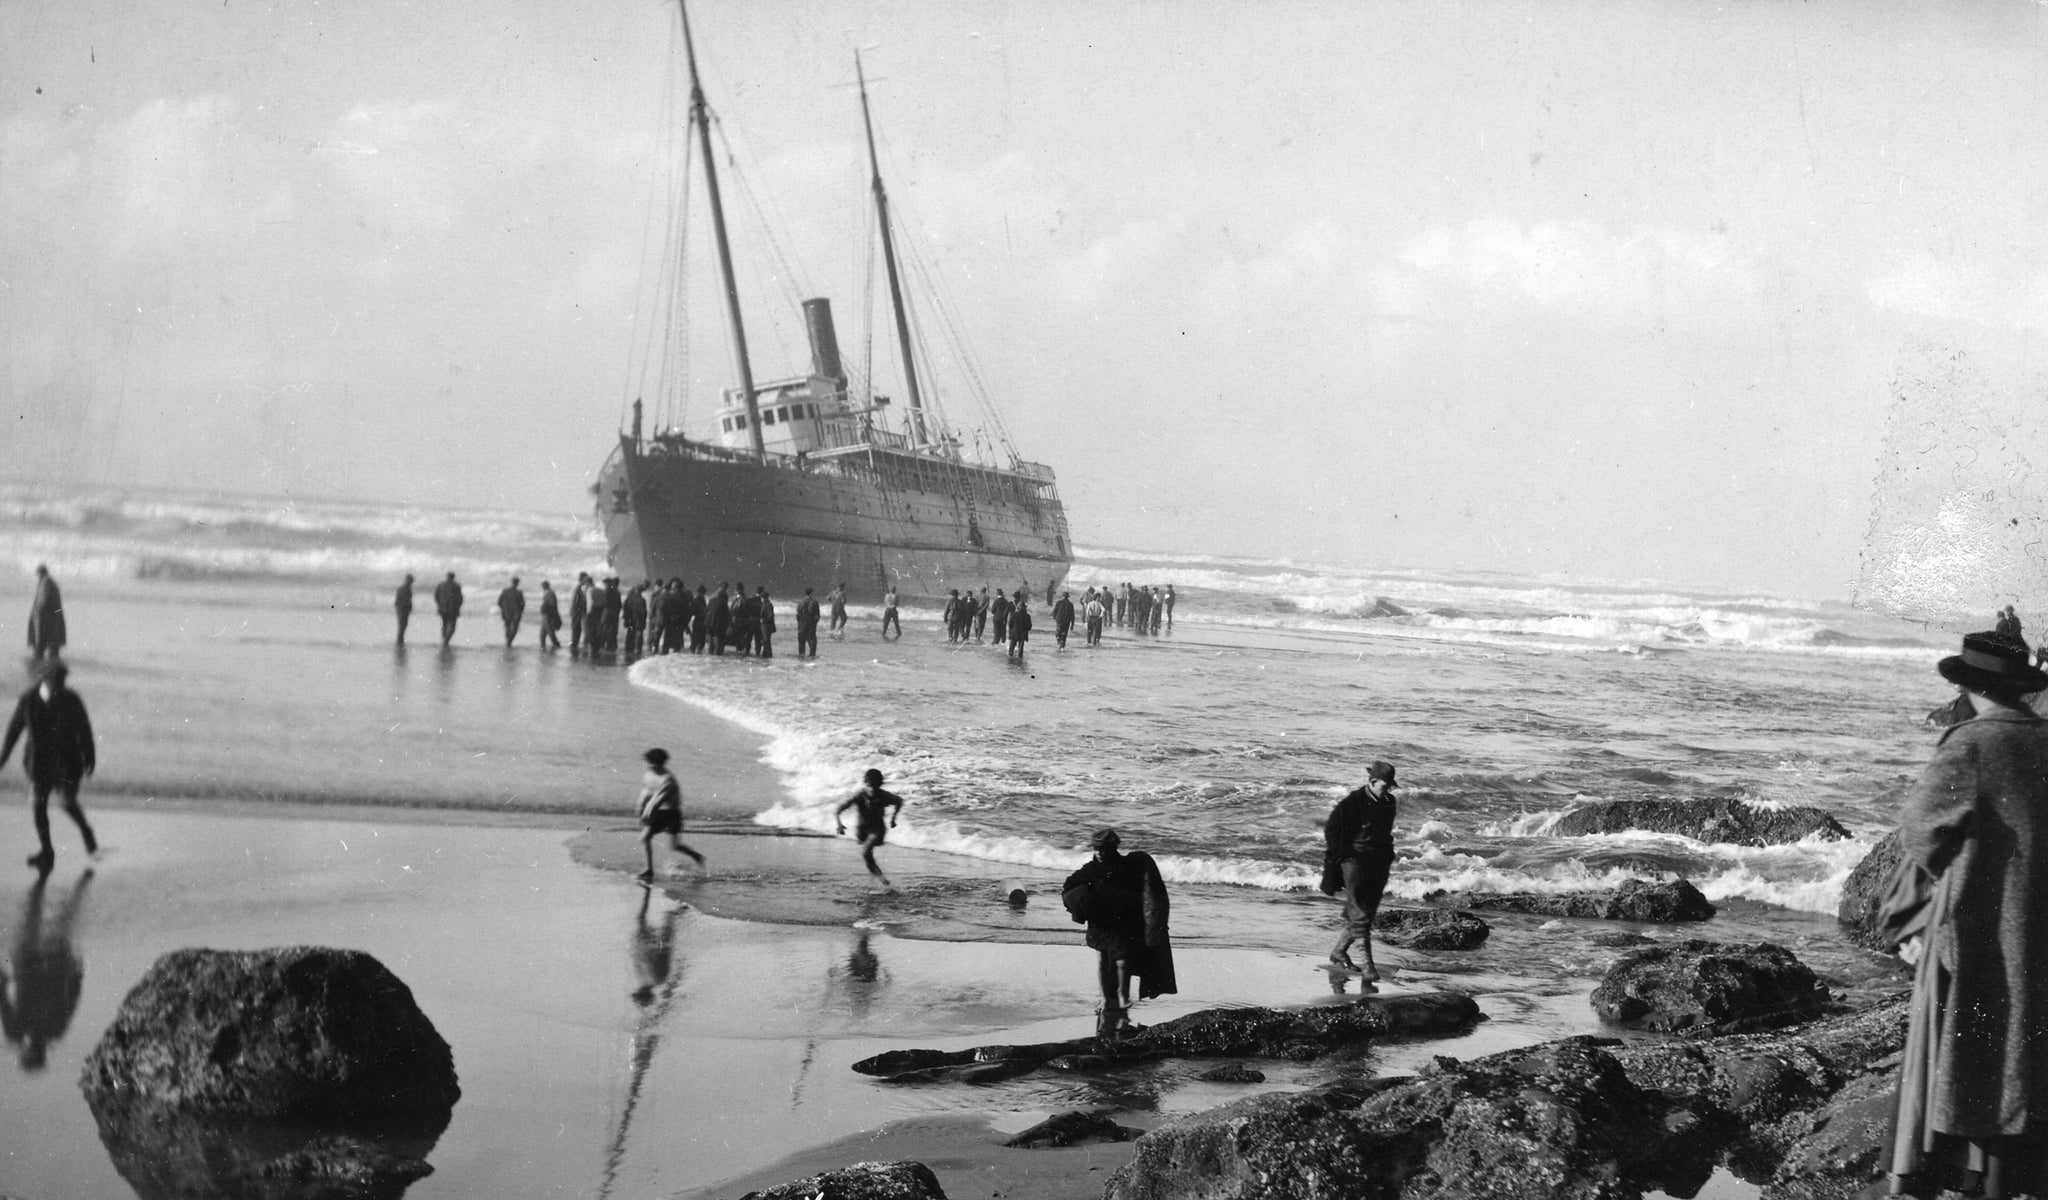 Onlookers viewing the wreck of the Santa Clara near Marshfield (Coos Bay), November 5, 1915. -- Courtesy of Coos History Museum & Maritime Collection (982-190.61)